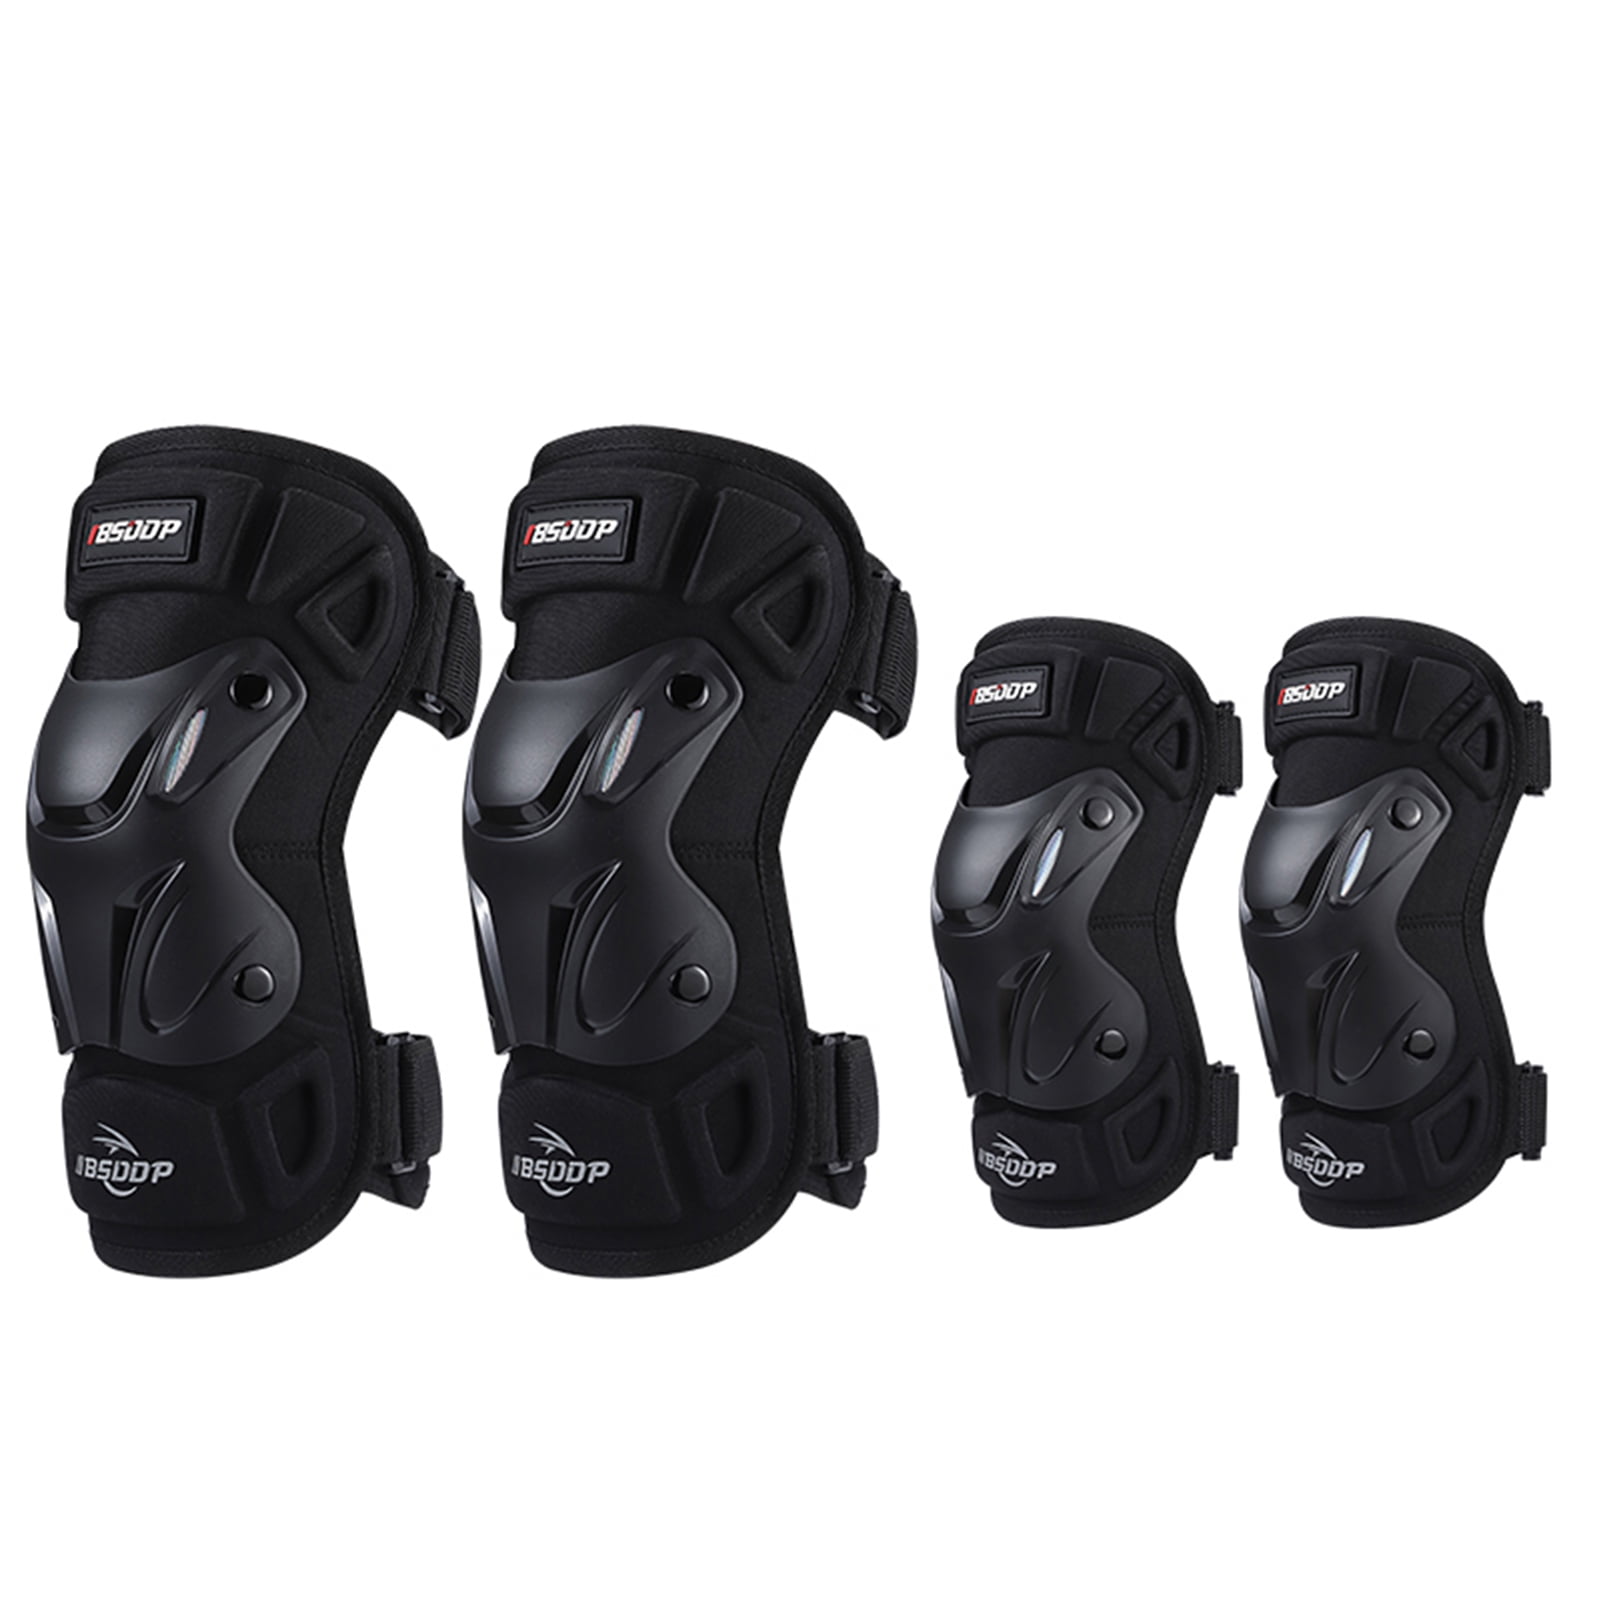 Safety Adult Motorcycle Racing Knee Protector Guards Shin Pads Protective Gear 